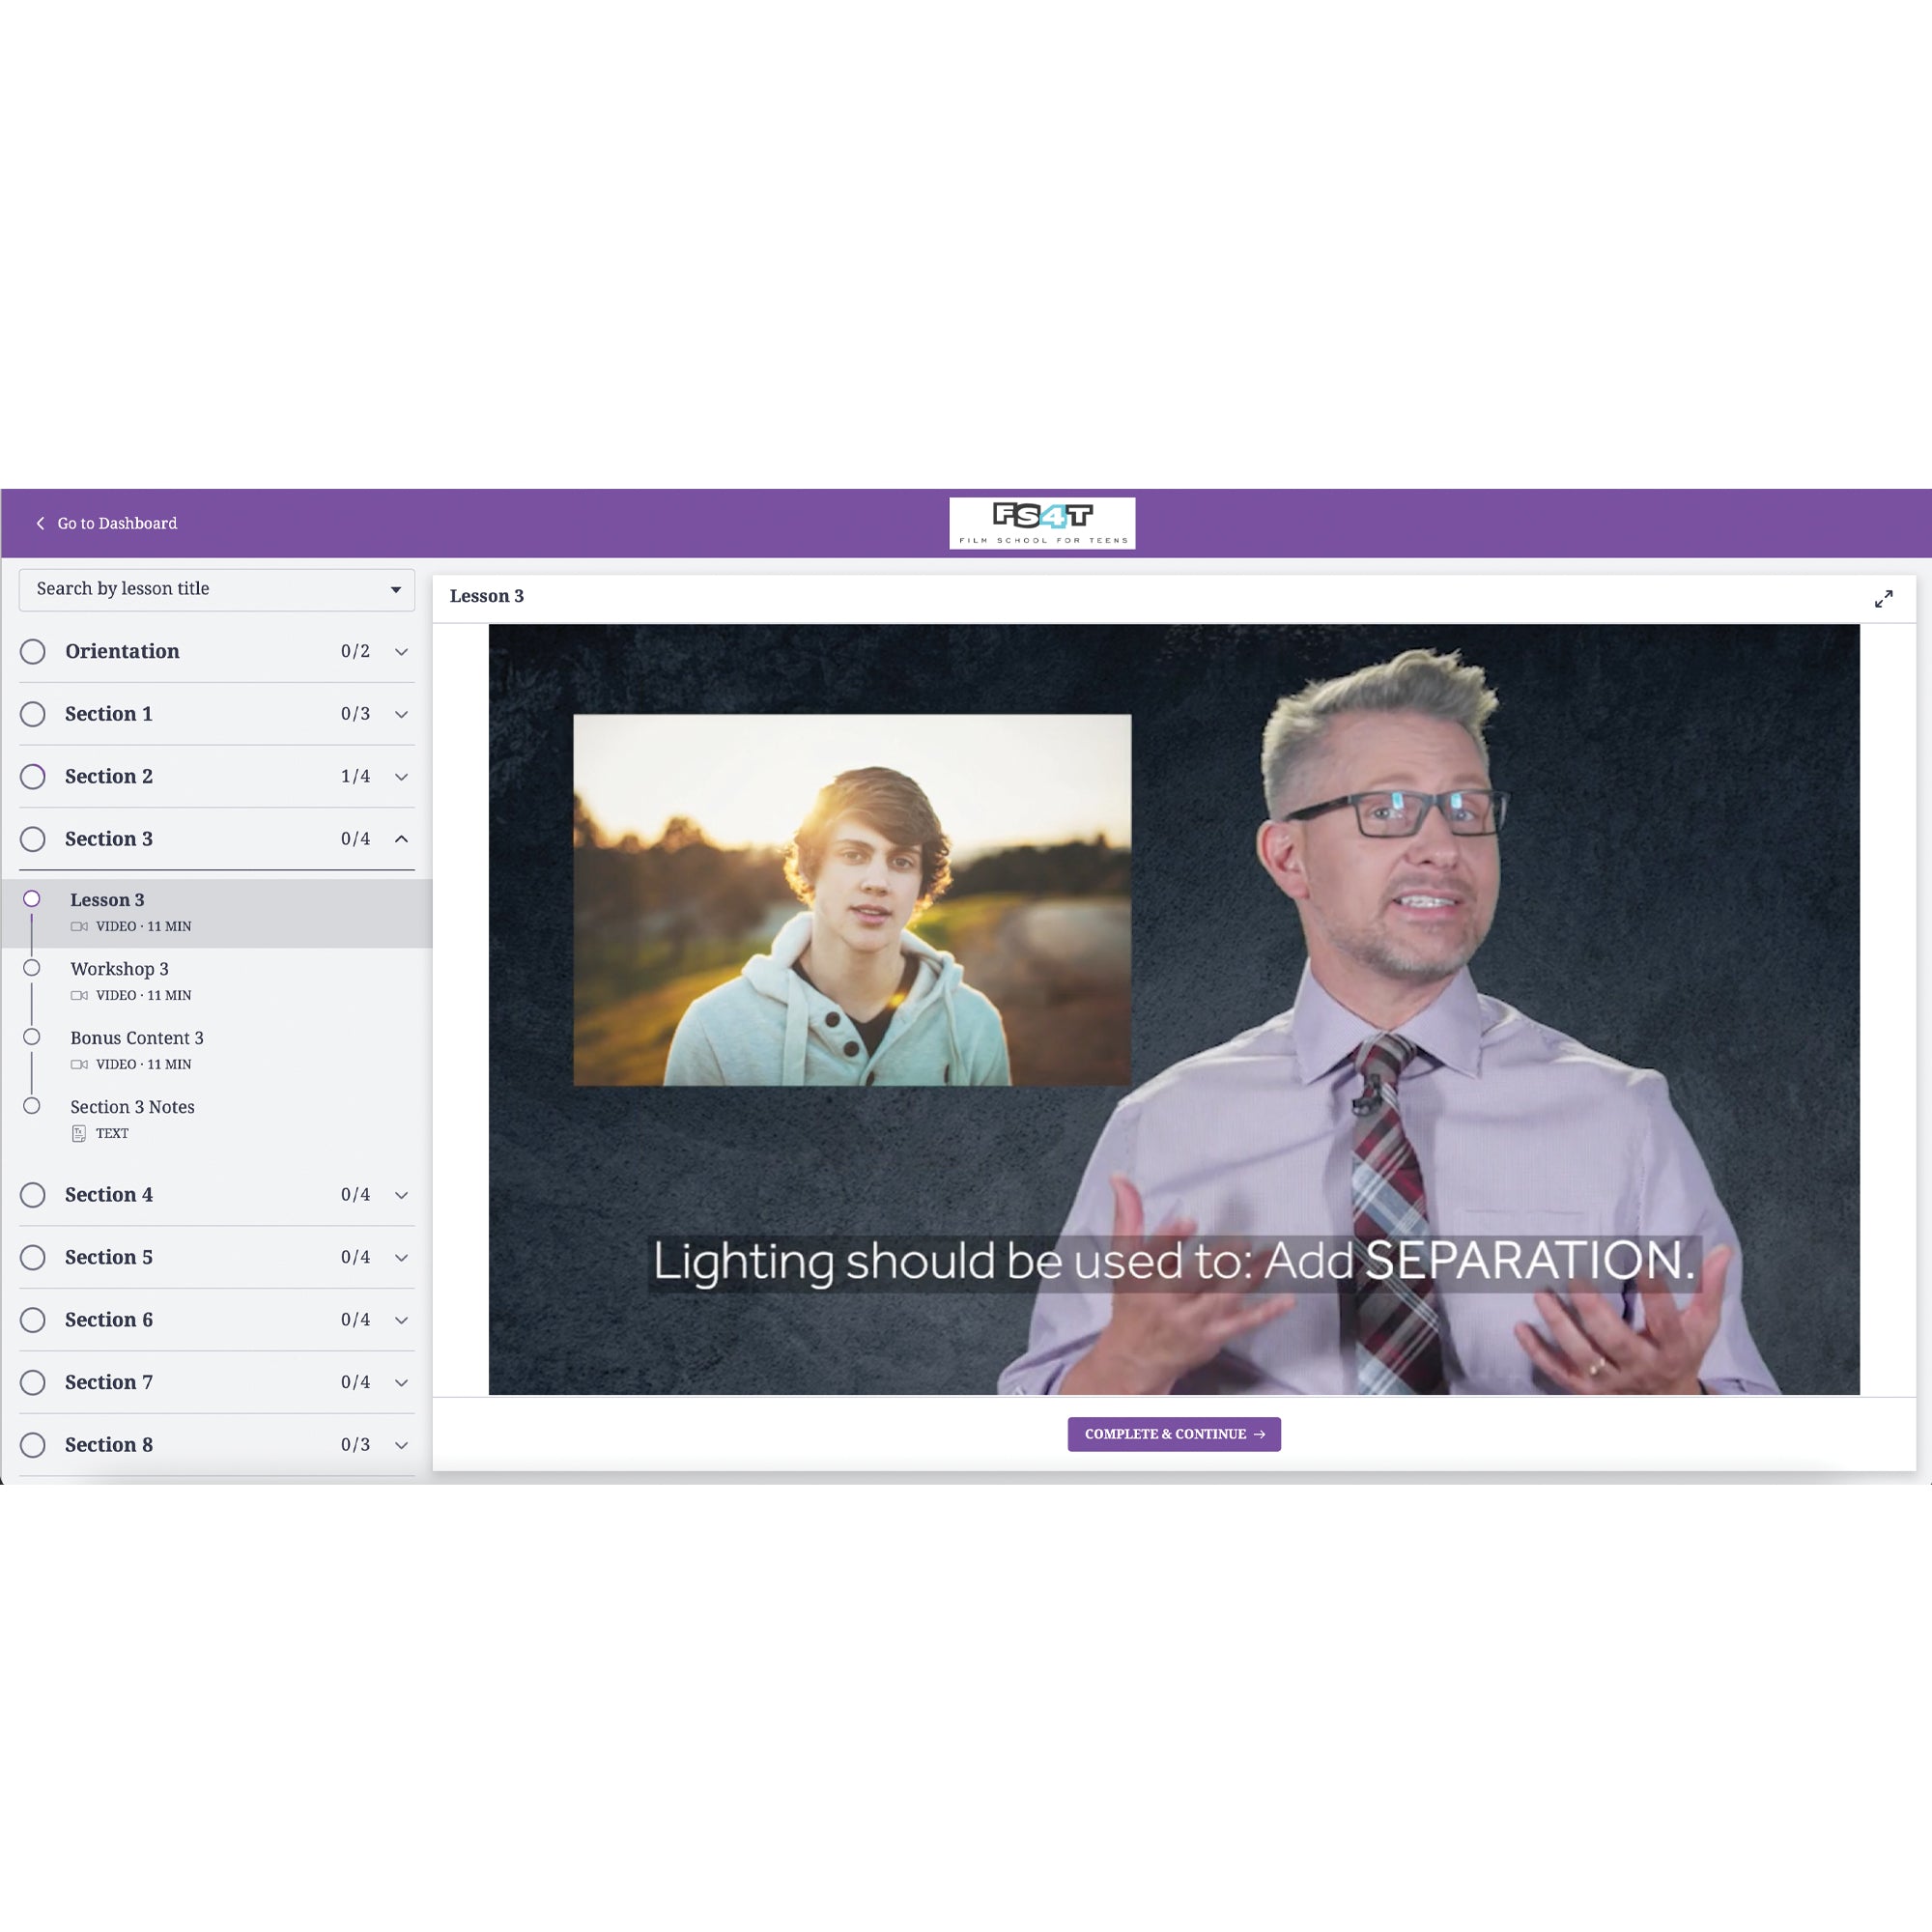 A screenshot from the Photography 4 Teens program. There is a menu on the left and the background is a white with a bright purple boarder at the top and a button at the bottom. The middle of the screen shows a screenshot of a gray-haired man with glasses and a necktie in the middle of talking. To the upper-left of him is a picture of a teenage boy outside with the sun setting behind them. The words across the screen reads “Lighting should be used to: Add SEPARATION.”